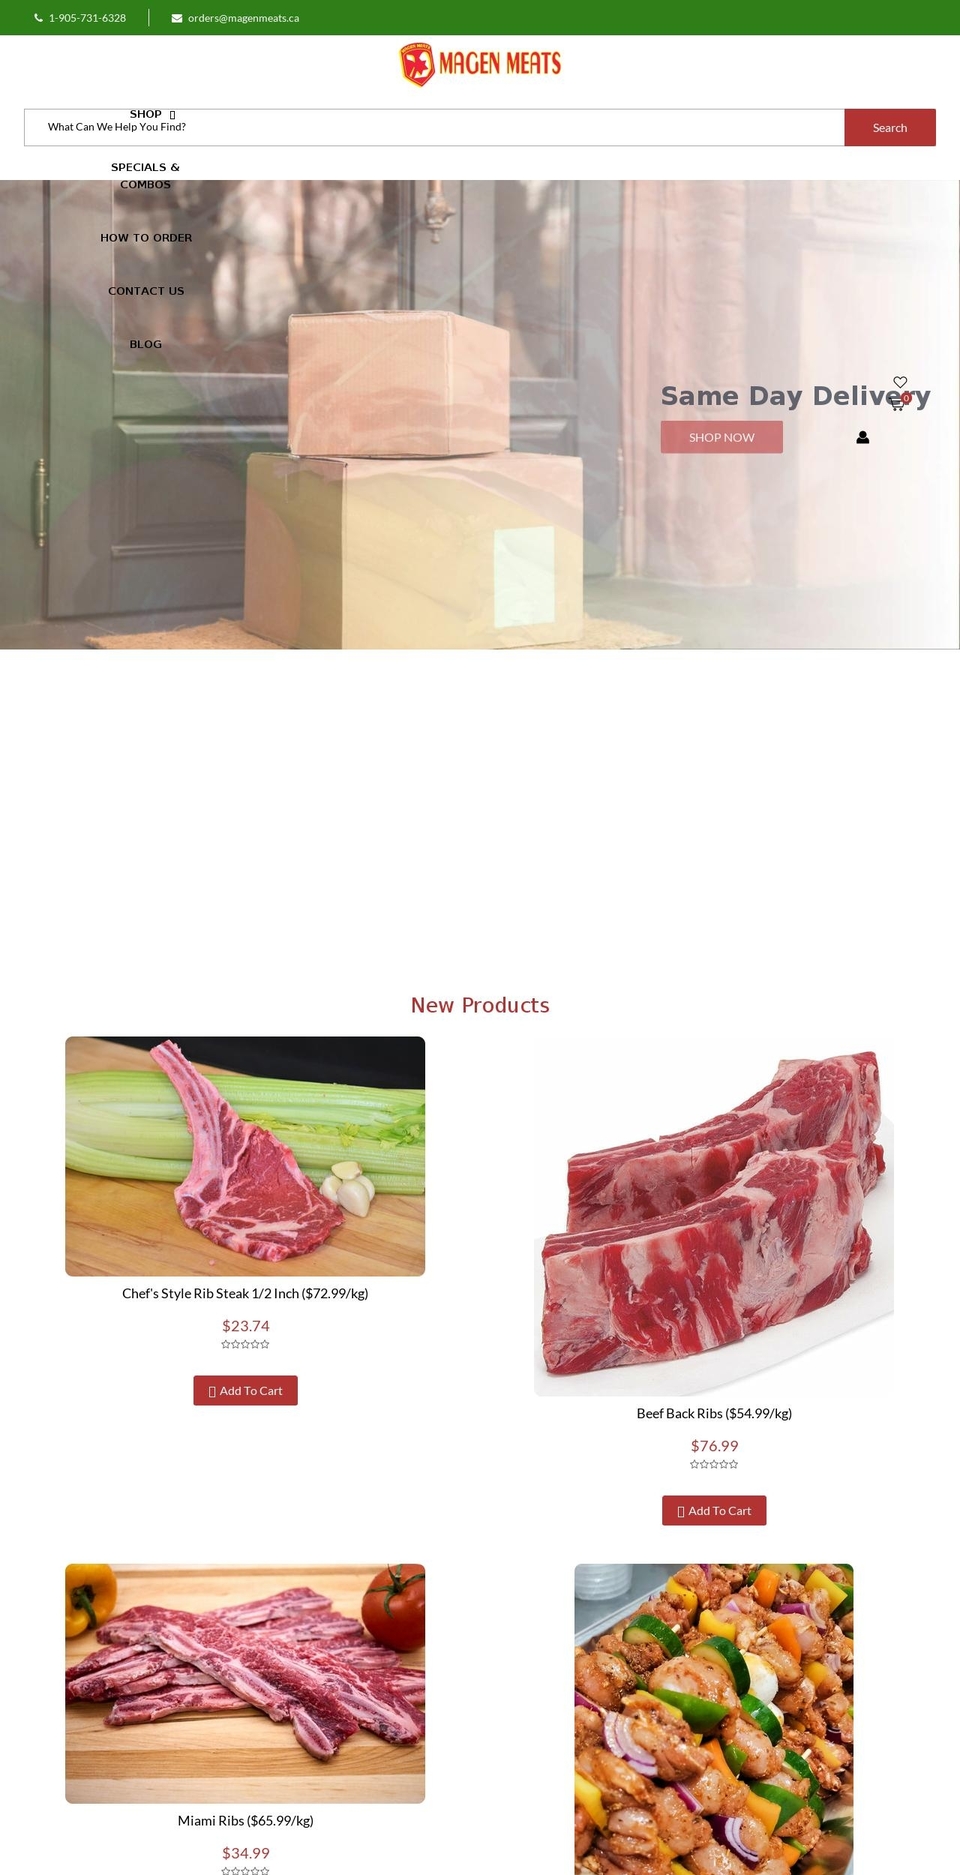 Groca Shopify theme site example magenmeats.ca